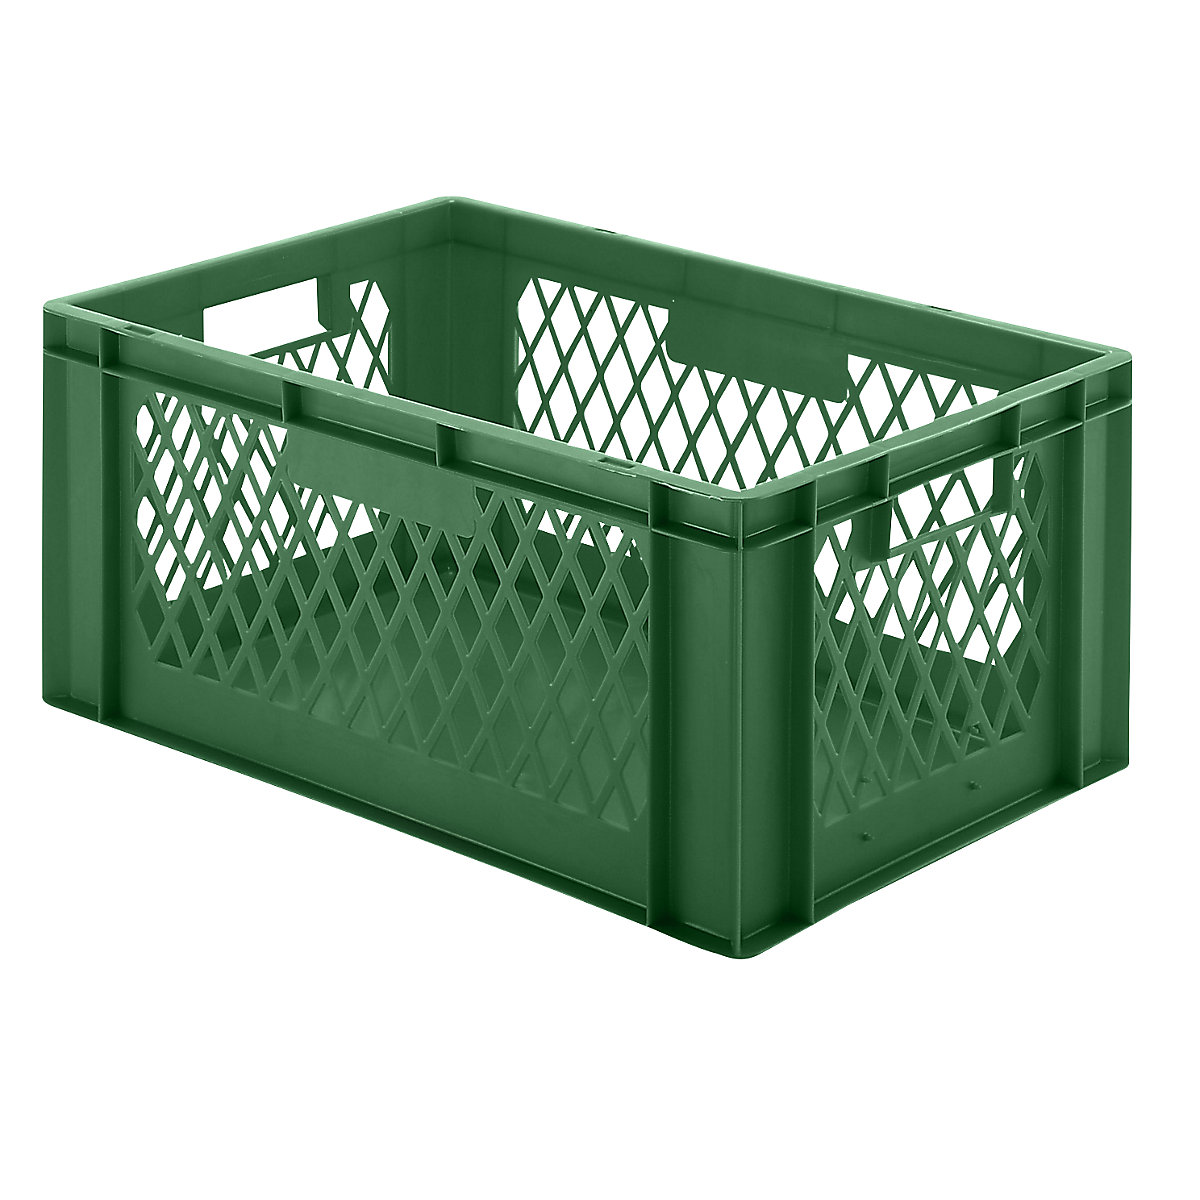 Euro stacking container, perforated walls, closed base, LxWxH 600 x 400 x 270 mm, green, pack of 5